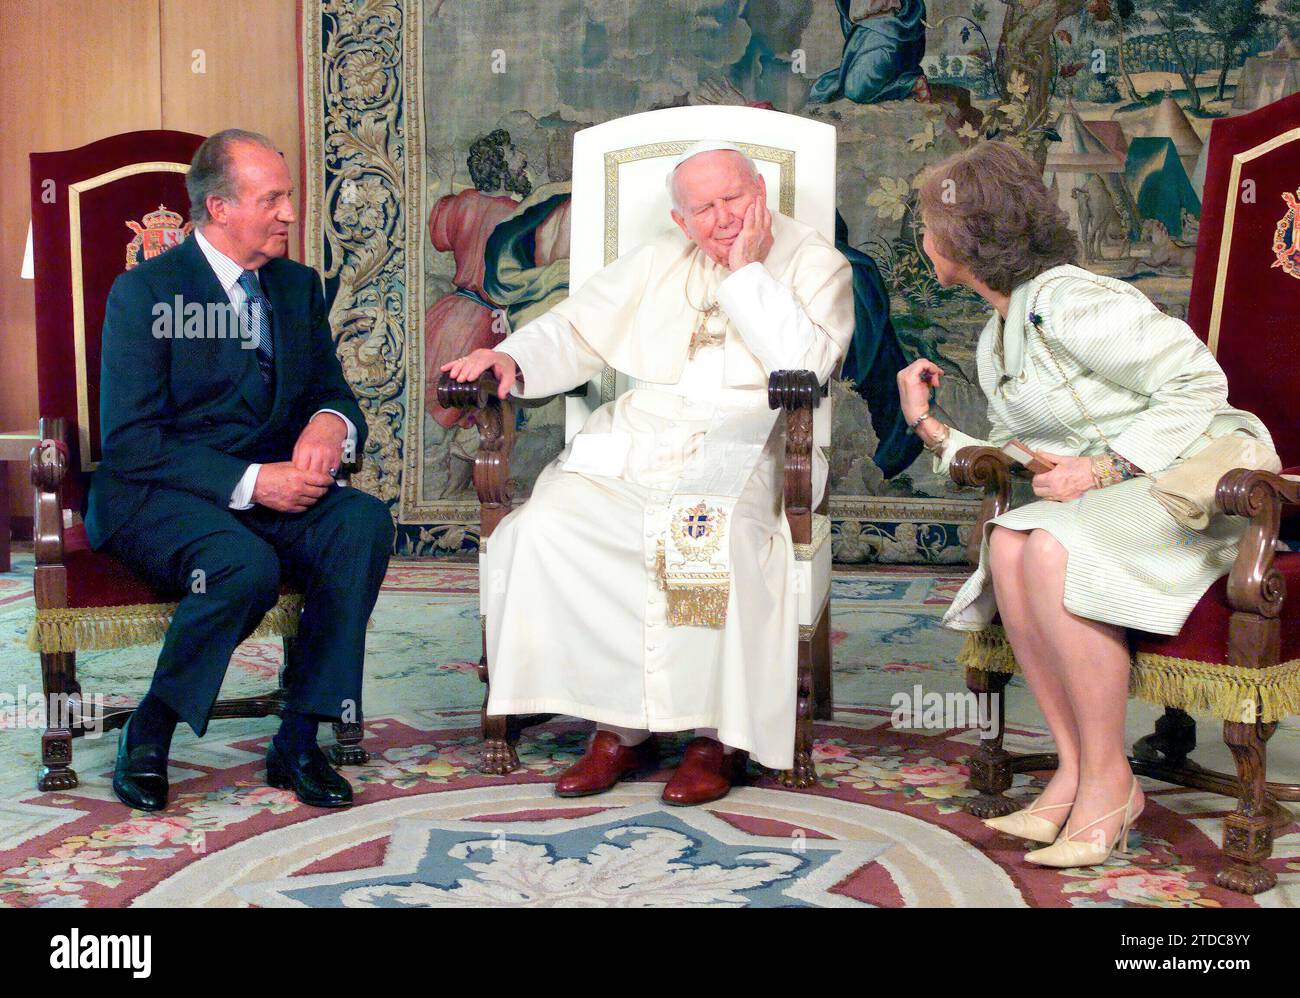 Madrid, 05/03/2003. Trip of John Paul II to Madrid. Meeting of His Holiness the Pope with His Holiness. MM. Kings Don Juan Carlos and Doña Sofía in the State pavilion of the Barajas Airport. Credit: Album / Archivo ABC / José García,Ernesto Agudo,Jaime García Stock Photo